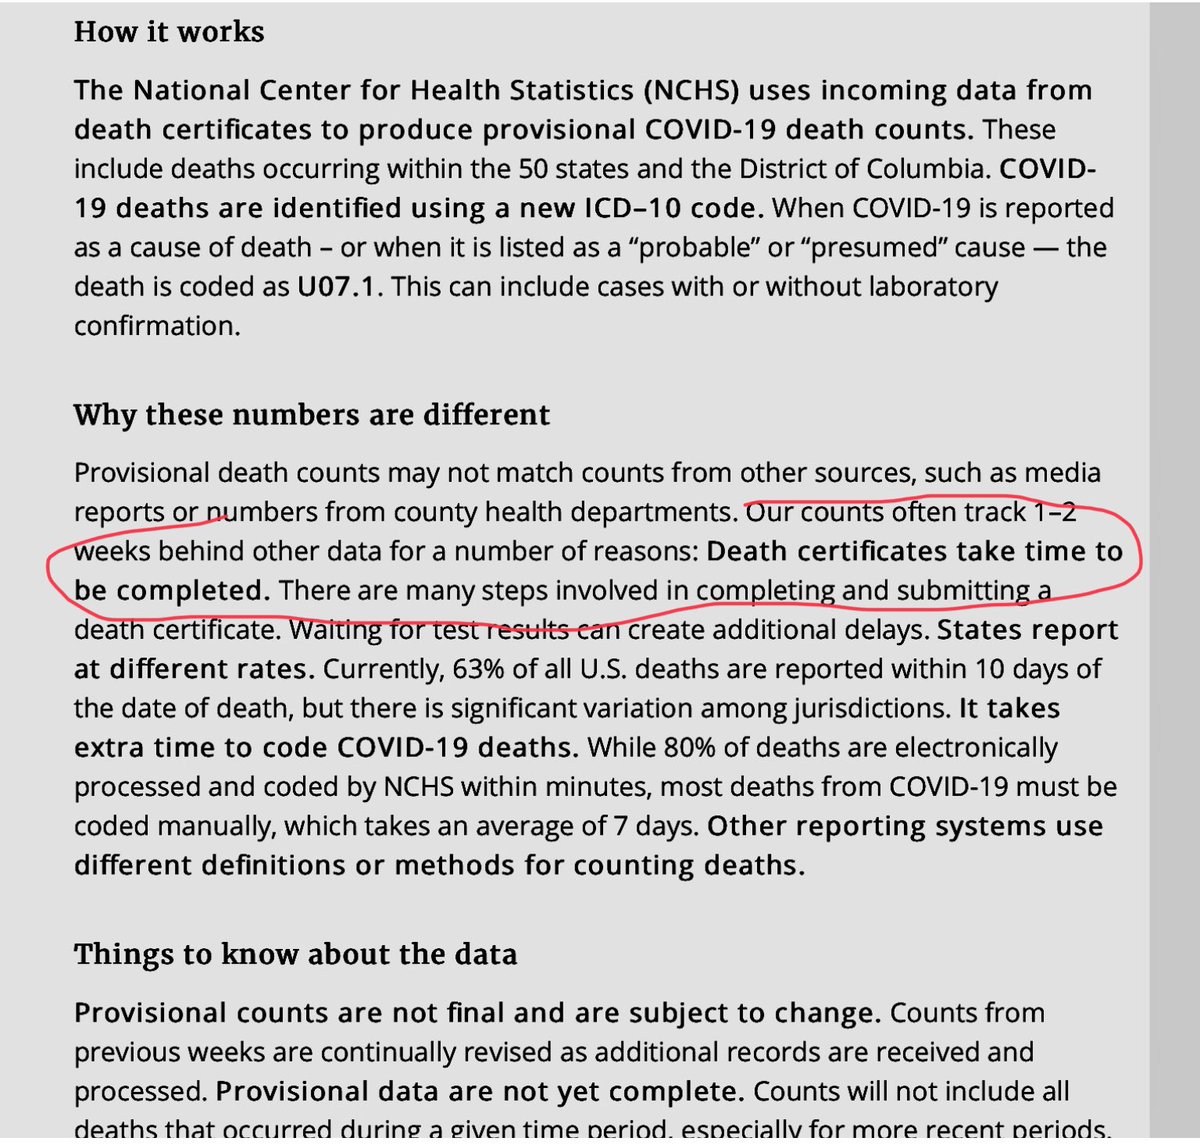 @bigp1830 @Chinohaunt66 @the_resistor @realDonaldTrump He is right, but 2 weeks ago 
NCHS uses death certificates AS base of data, 

Please retweet
Lots of imbeciles spread this now

Here is why / what